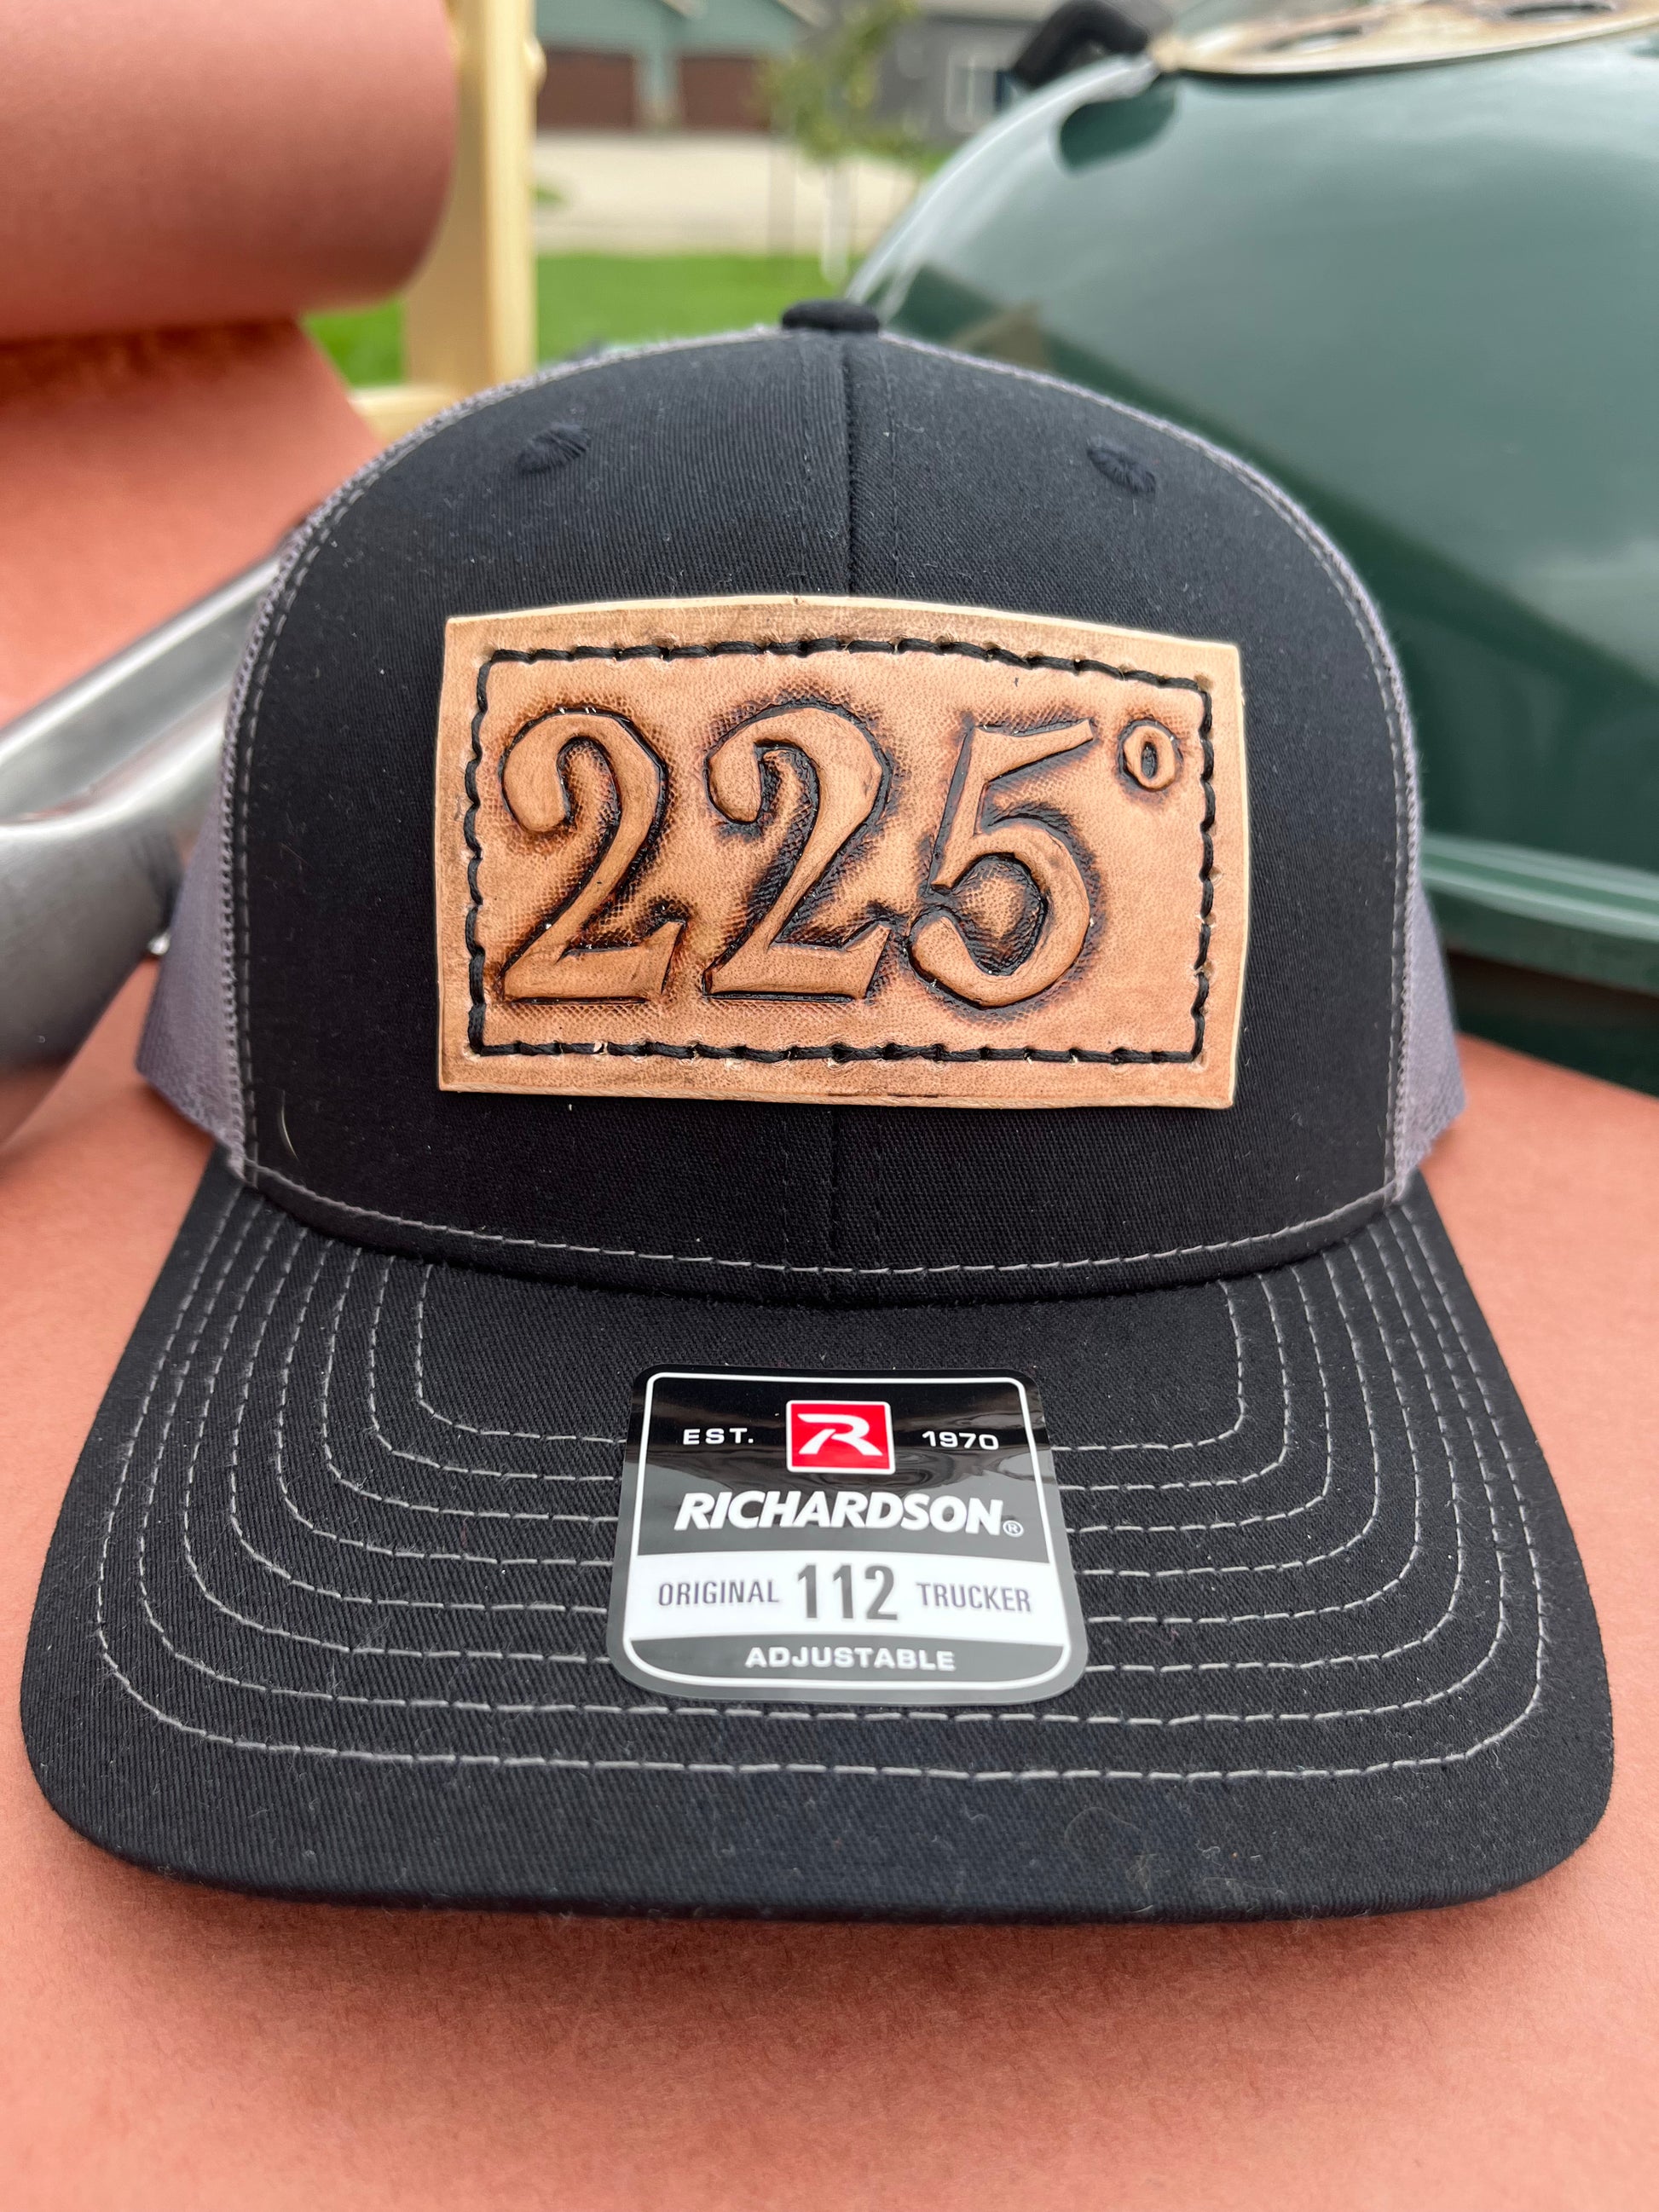 Black and gray richardson 112 trucker hat with a hand stitched leather patch on the front with 225 degrees tooled into the patch